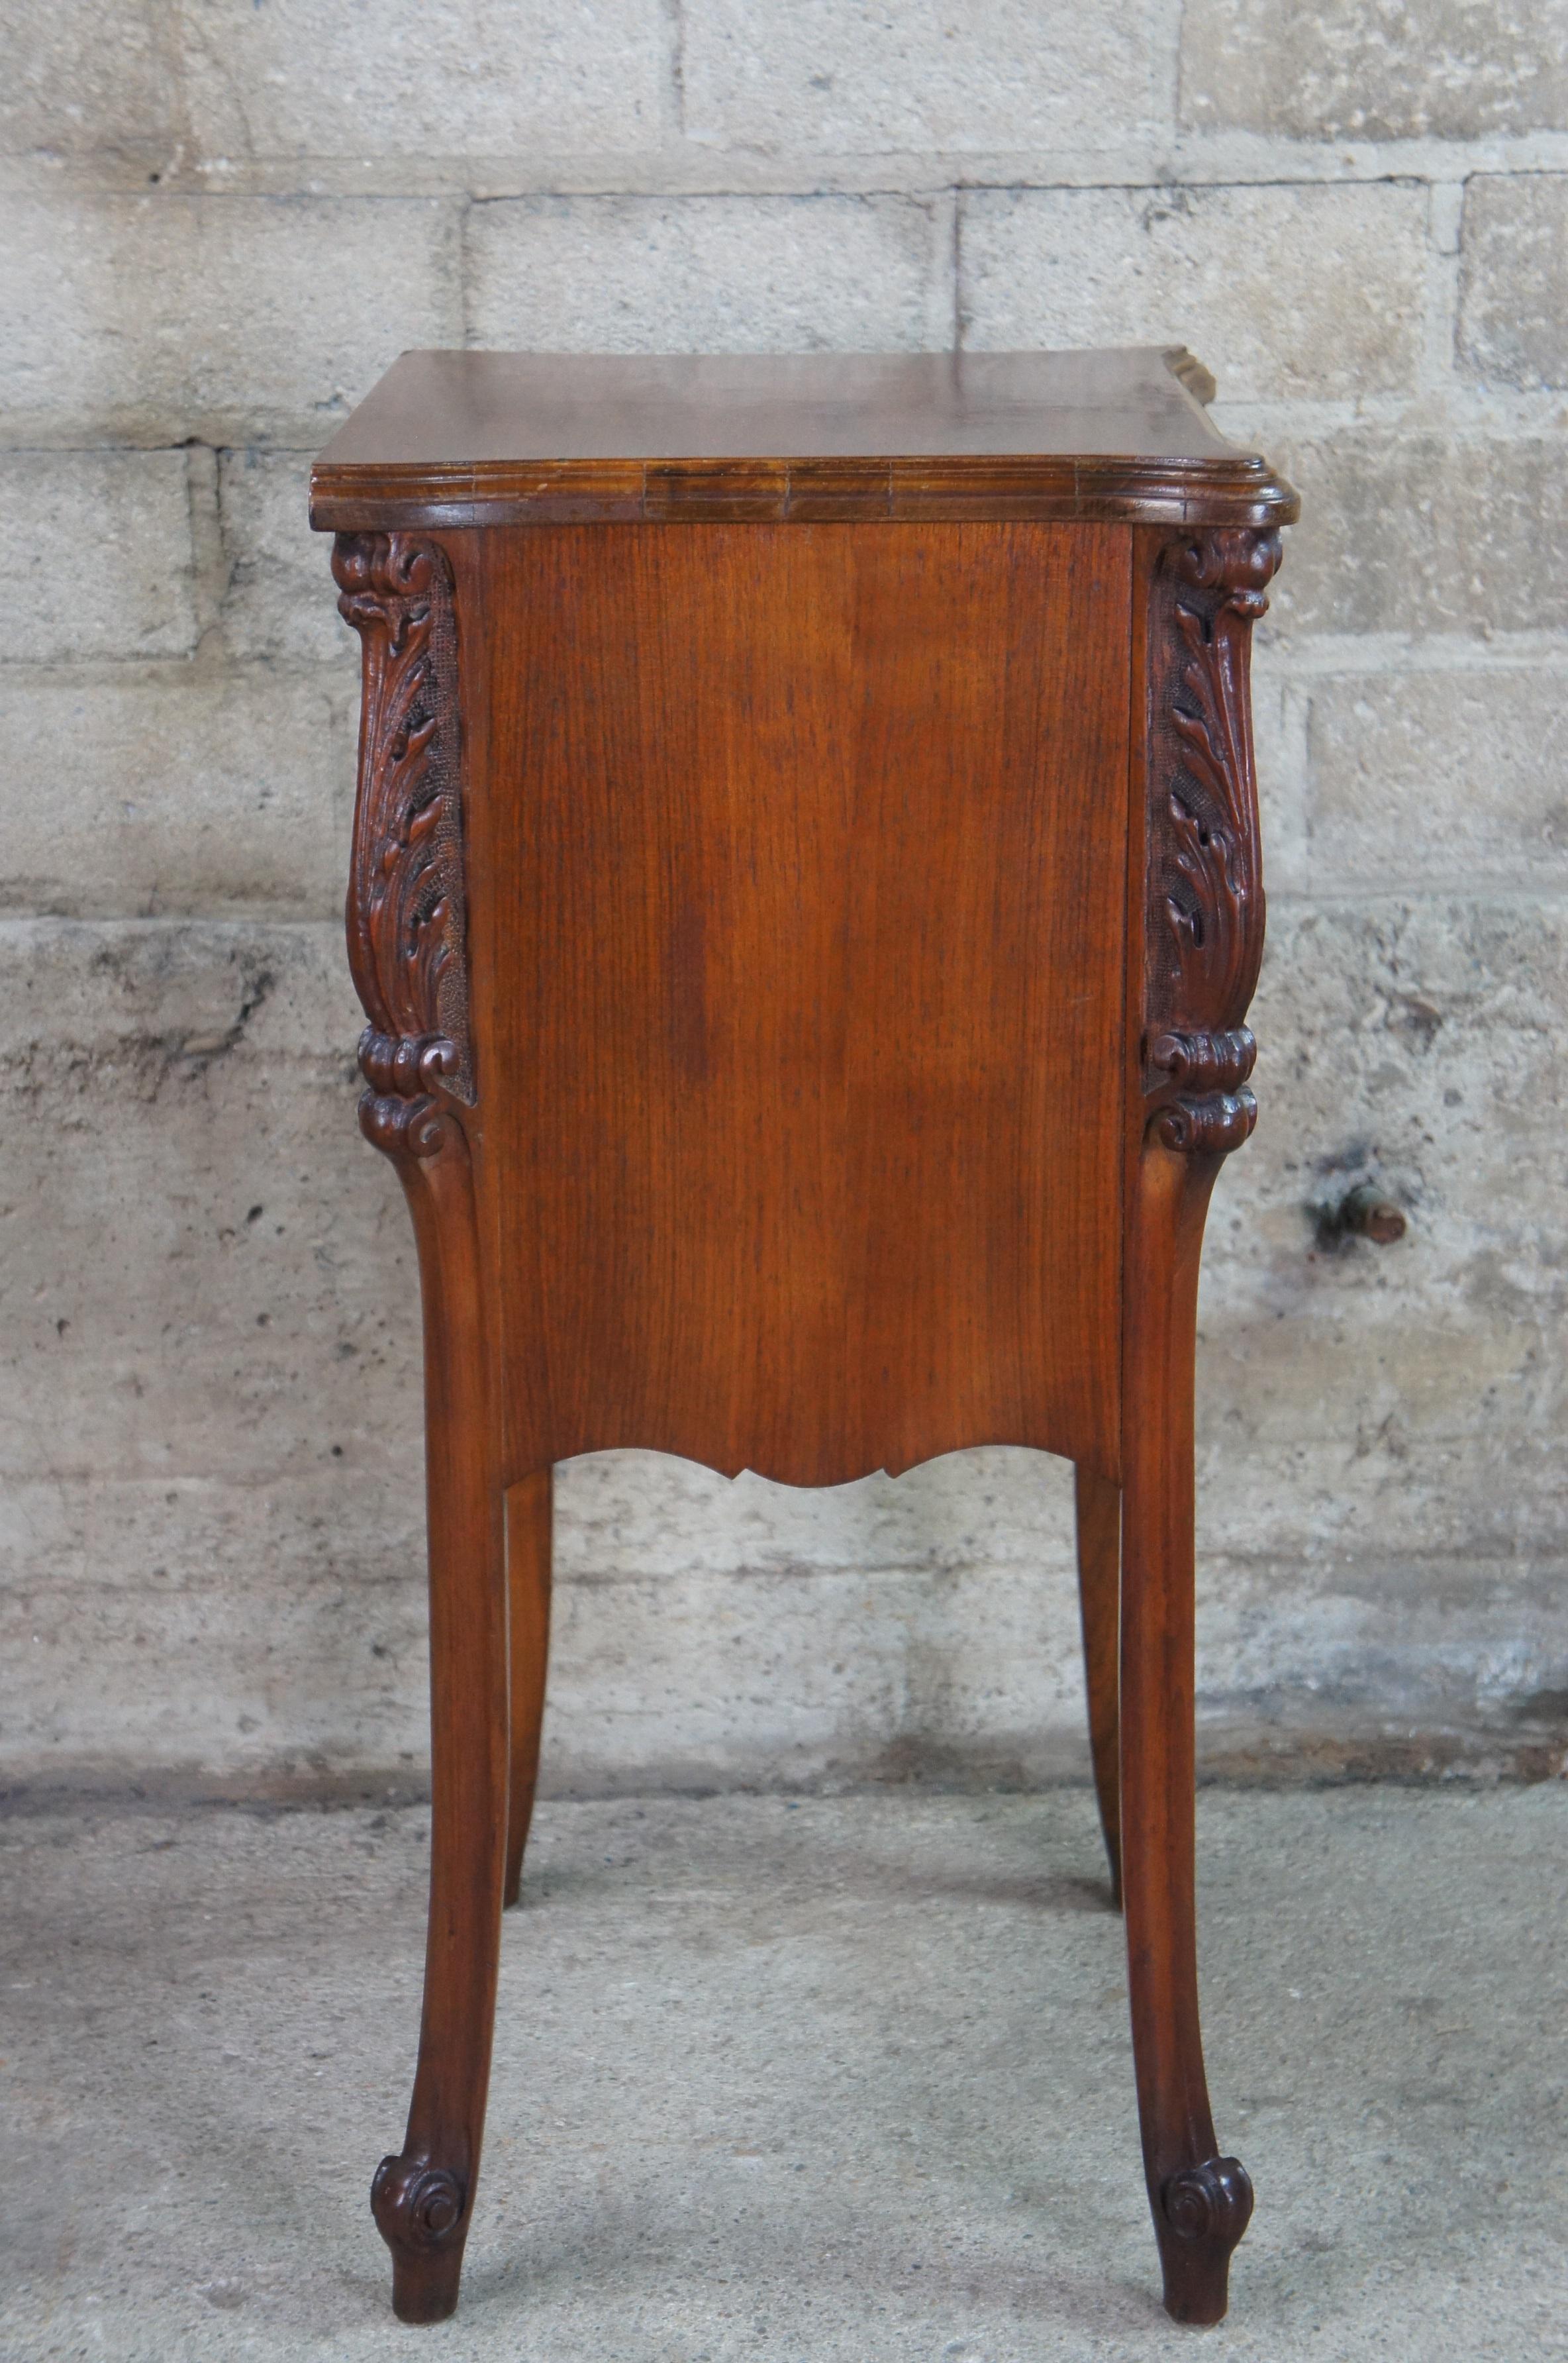 19th Century Antique French Baroque Rococo Carved Walnut 3 Drawer Side Table Nightstand